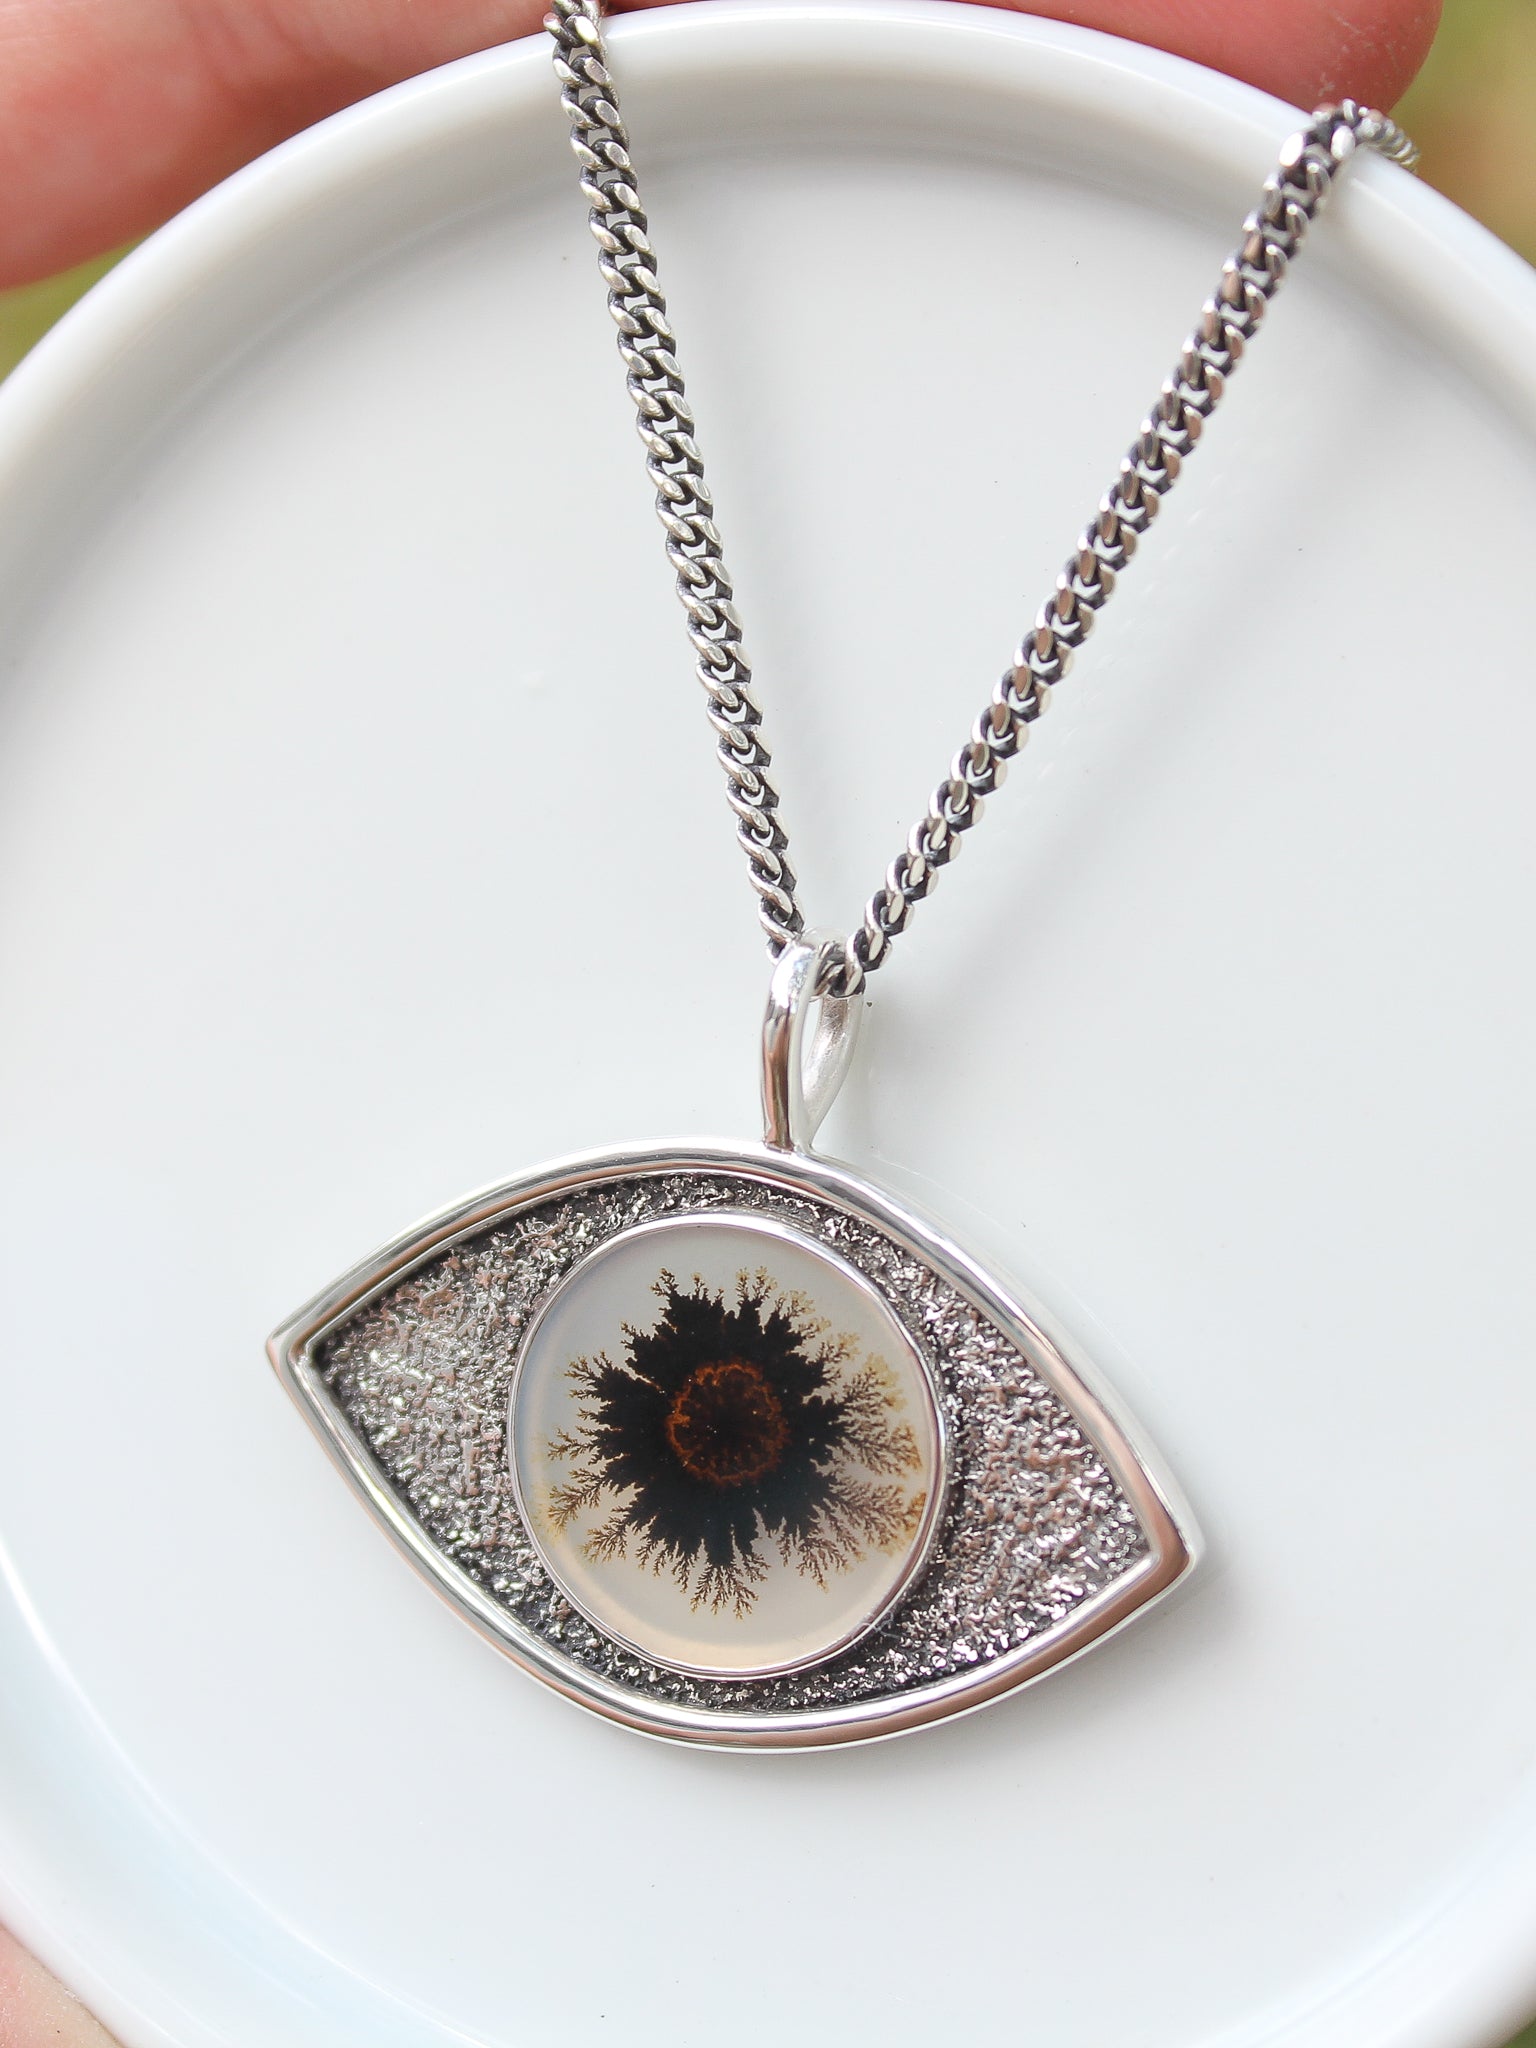 Dendritic Agate Eye Necklace